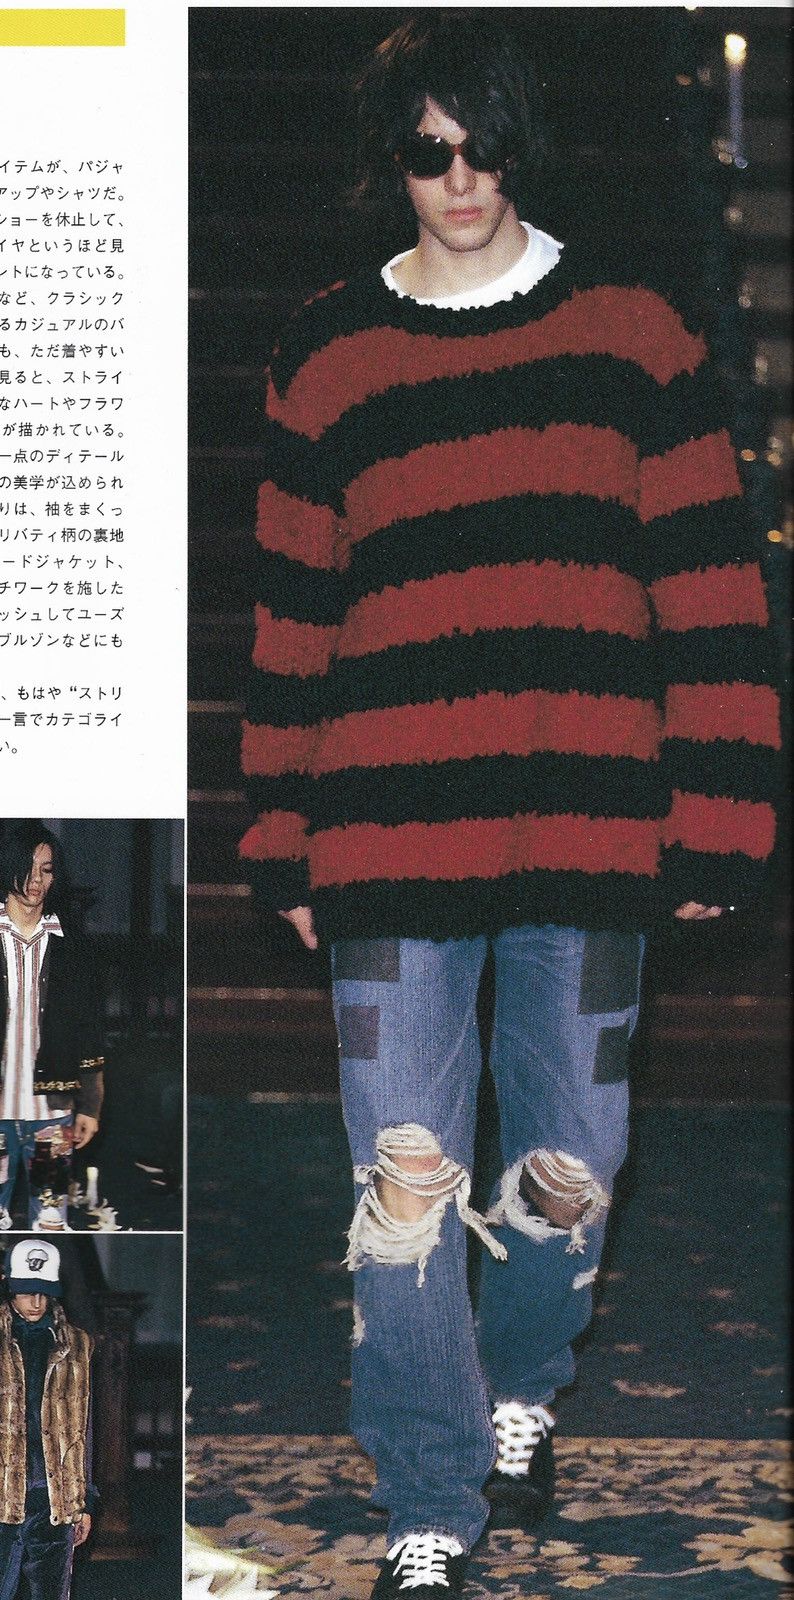 A/W03 “Touch Me I’m Sick” Cobain Grunge Runway Knit Sweater - 2